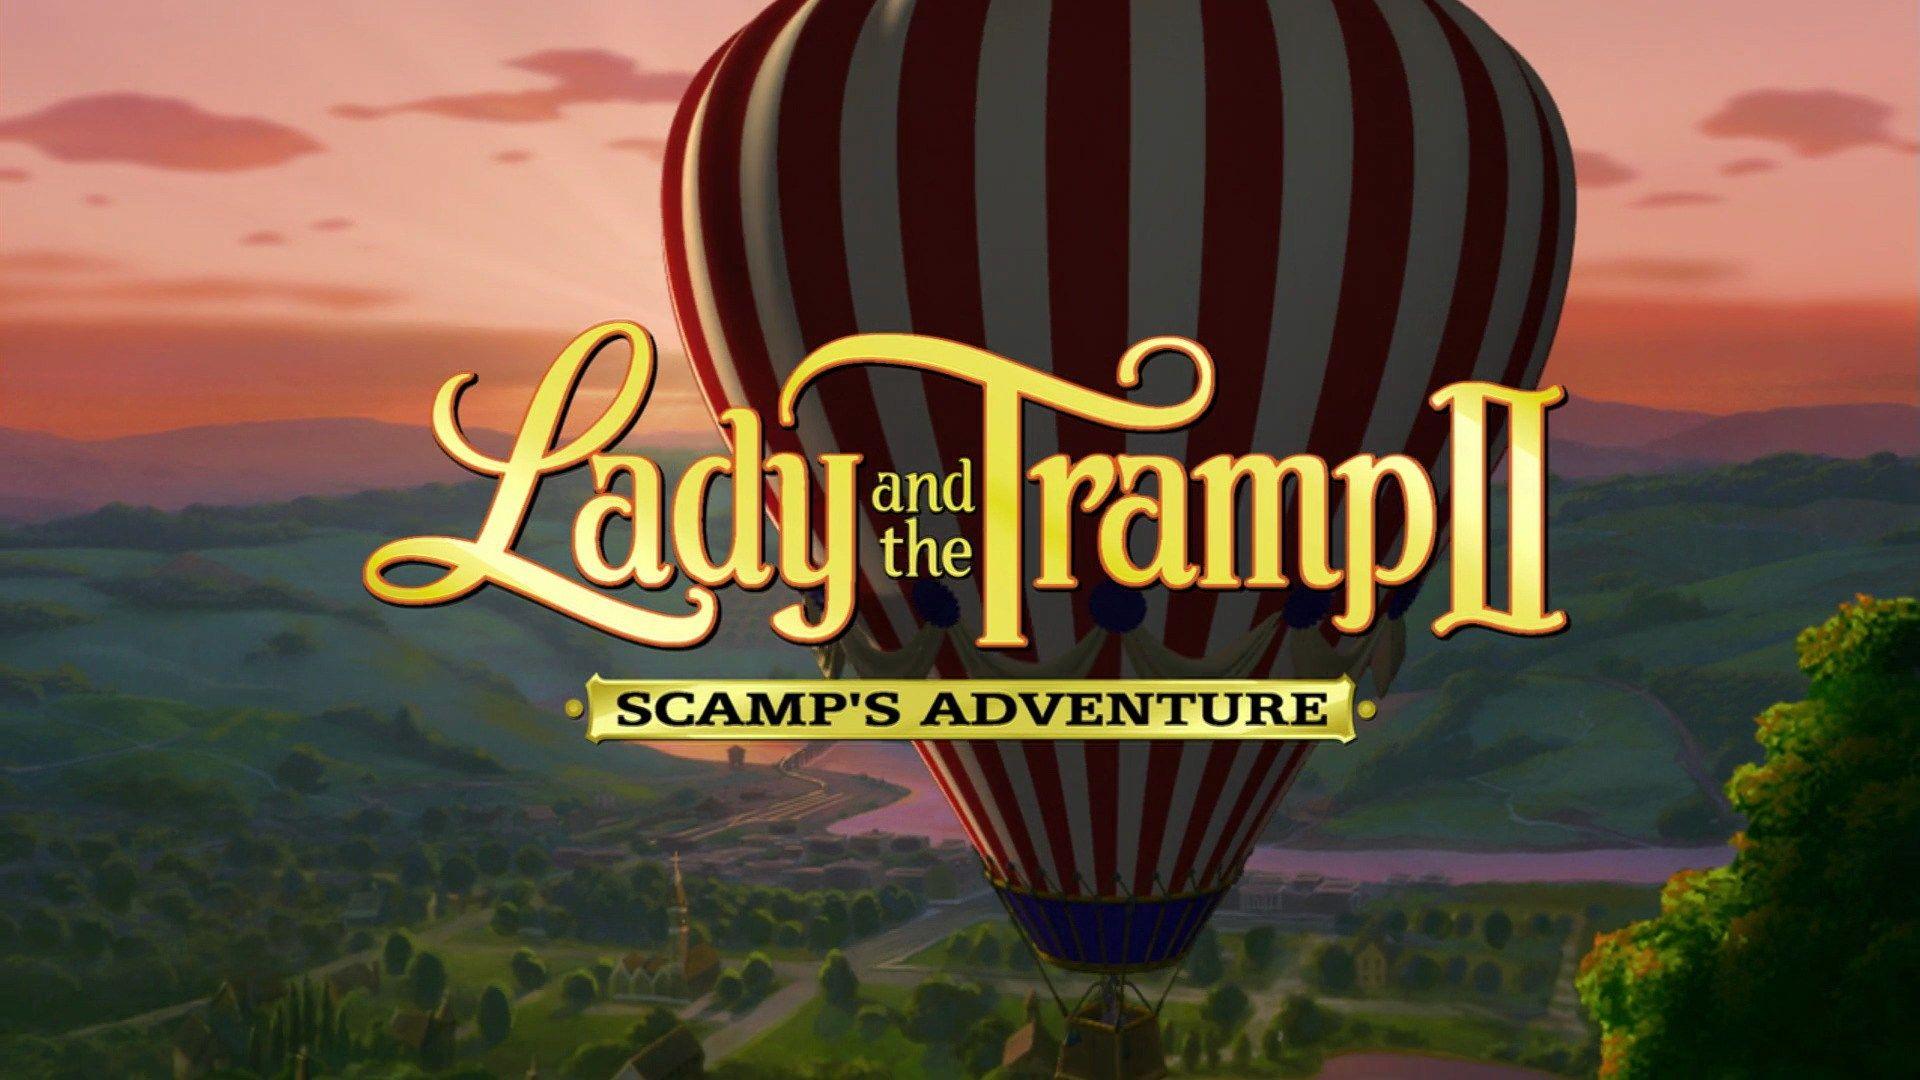 Lady and the Tramp Logo - Lady and the Tramp 2's Adventure